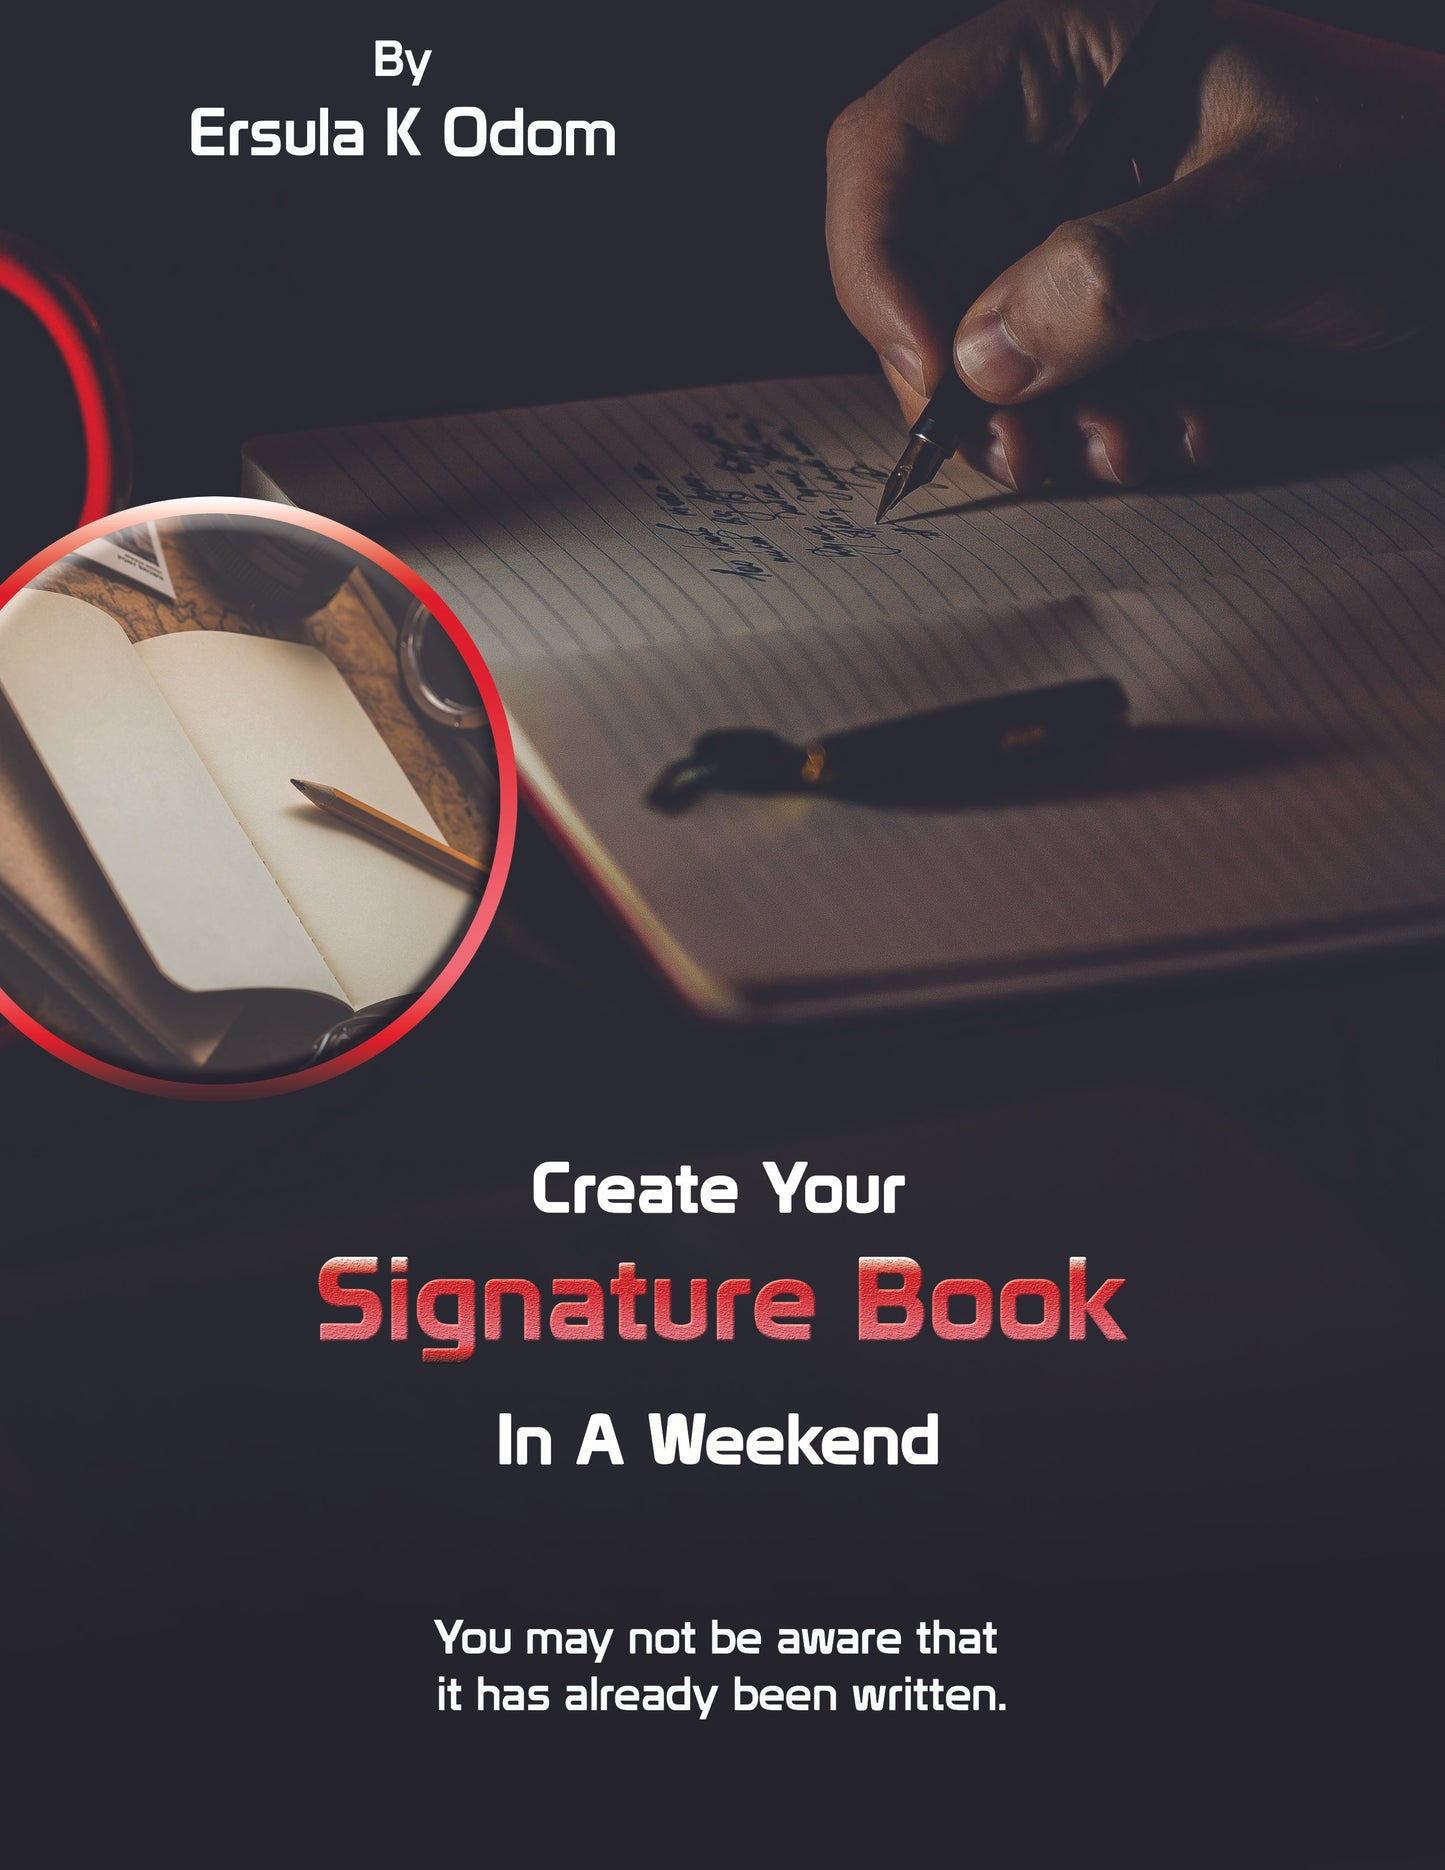 Create Your Signature Book In a Weekend